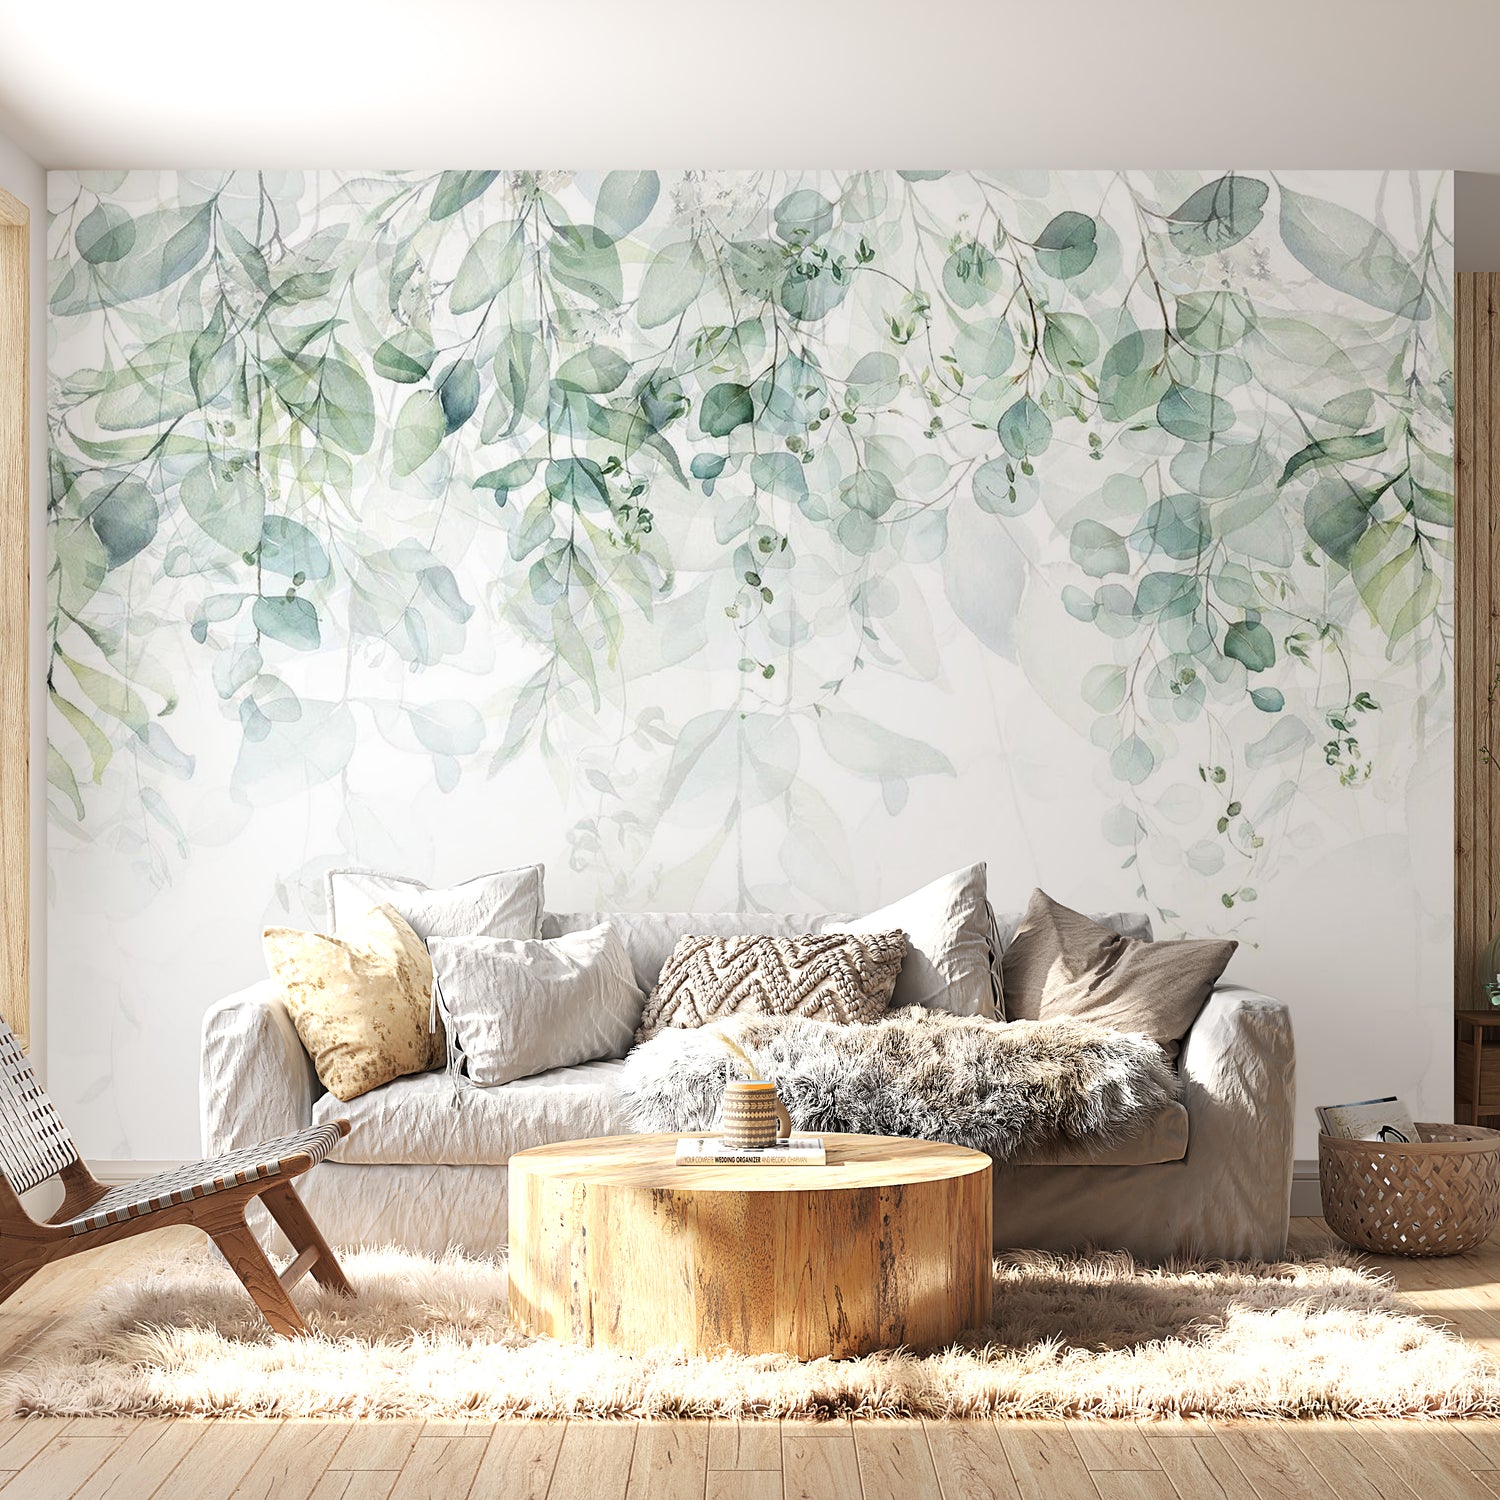 Peel & Stick Botanical Wall Mural - Gentle Touch Of Nature - Removable Wall Decals